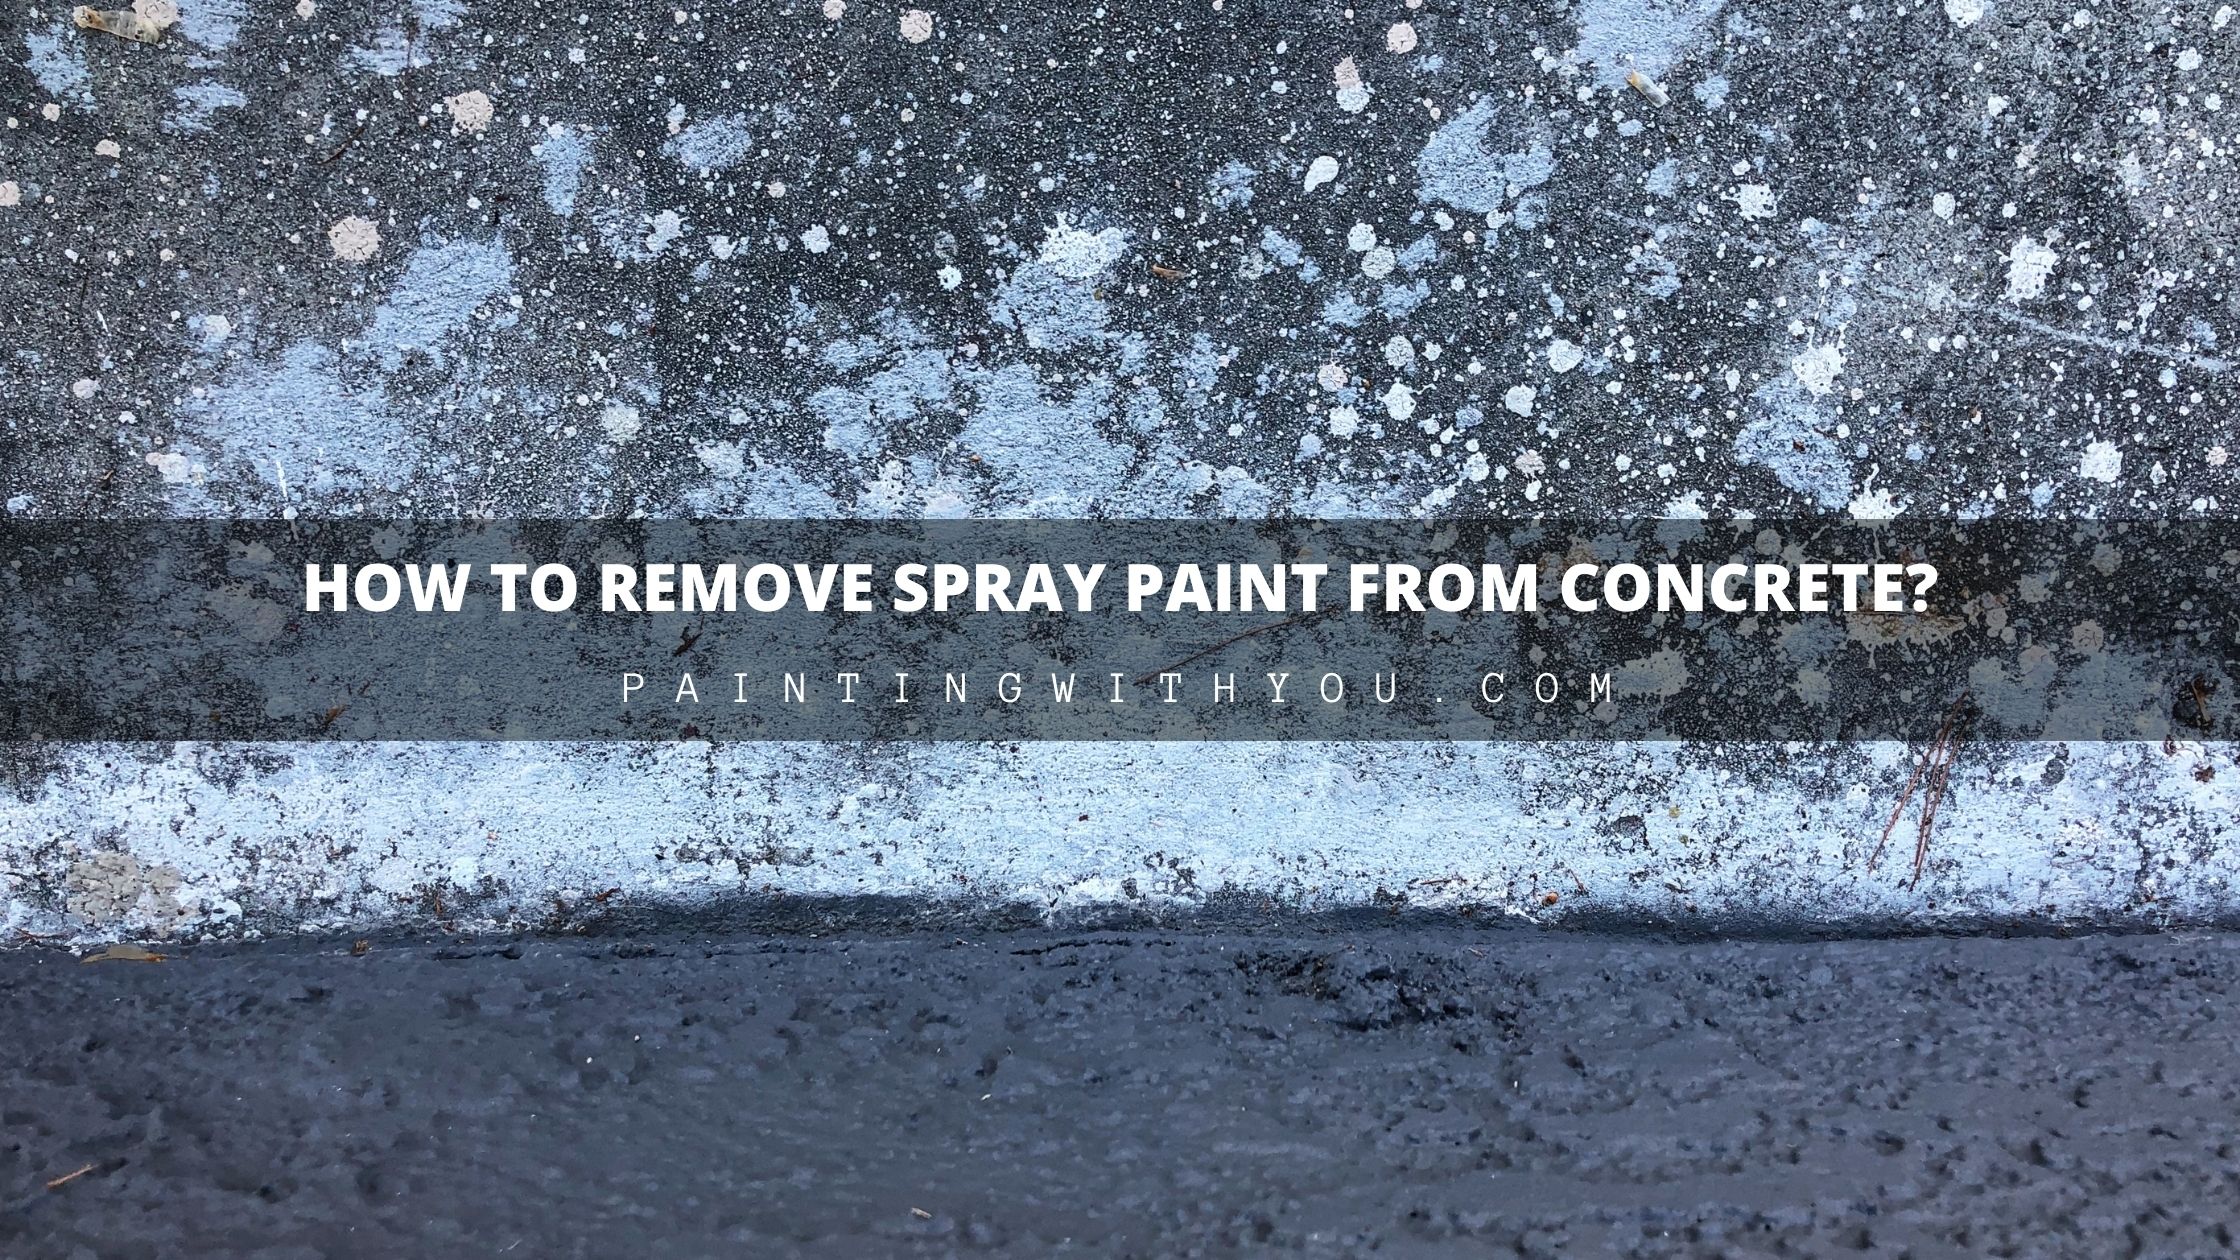 How do you remove spray paint from concrete